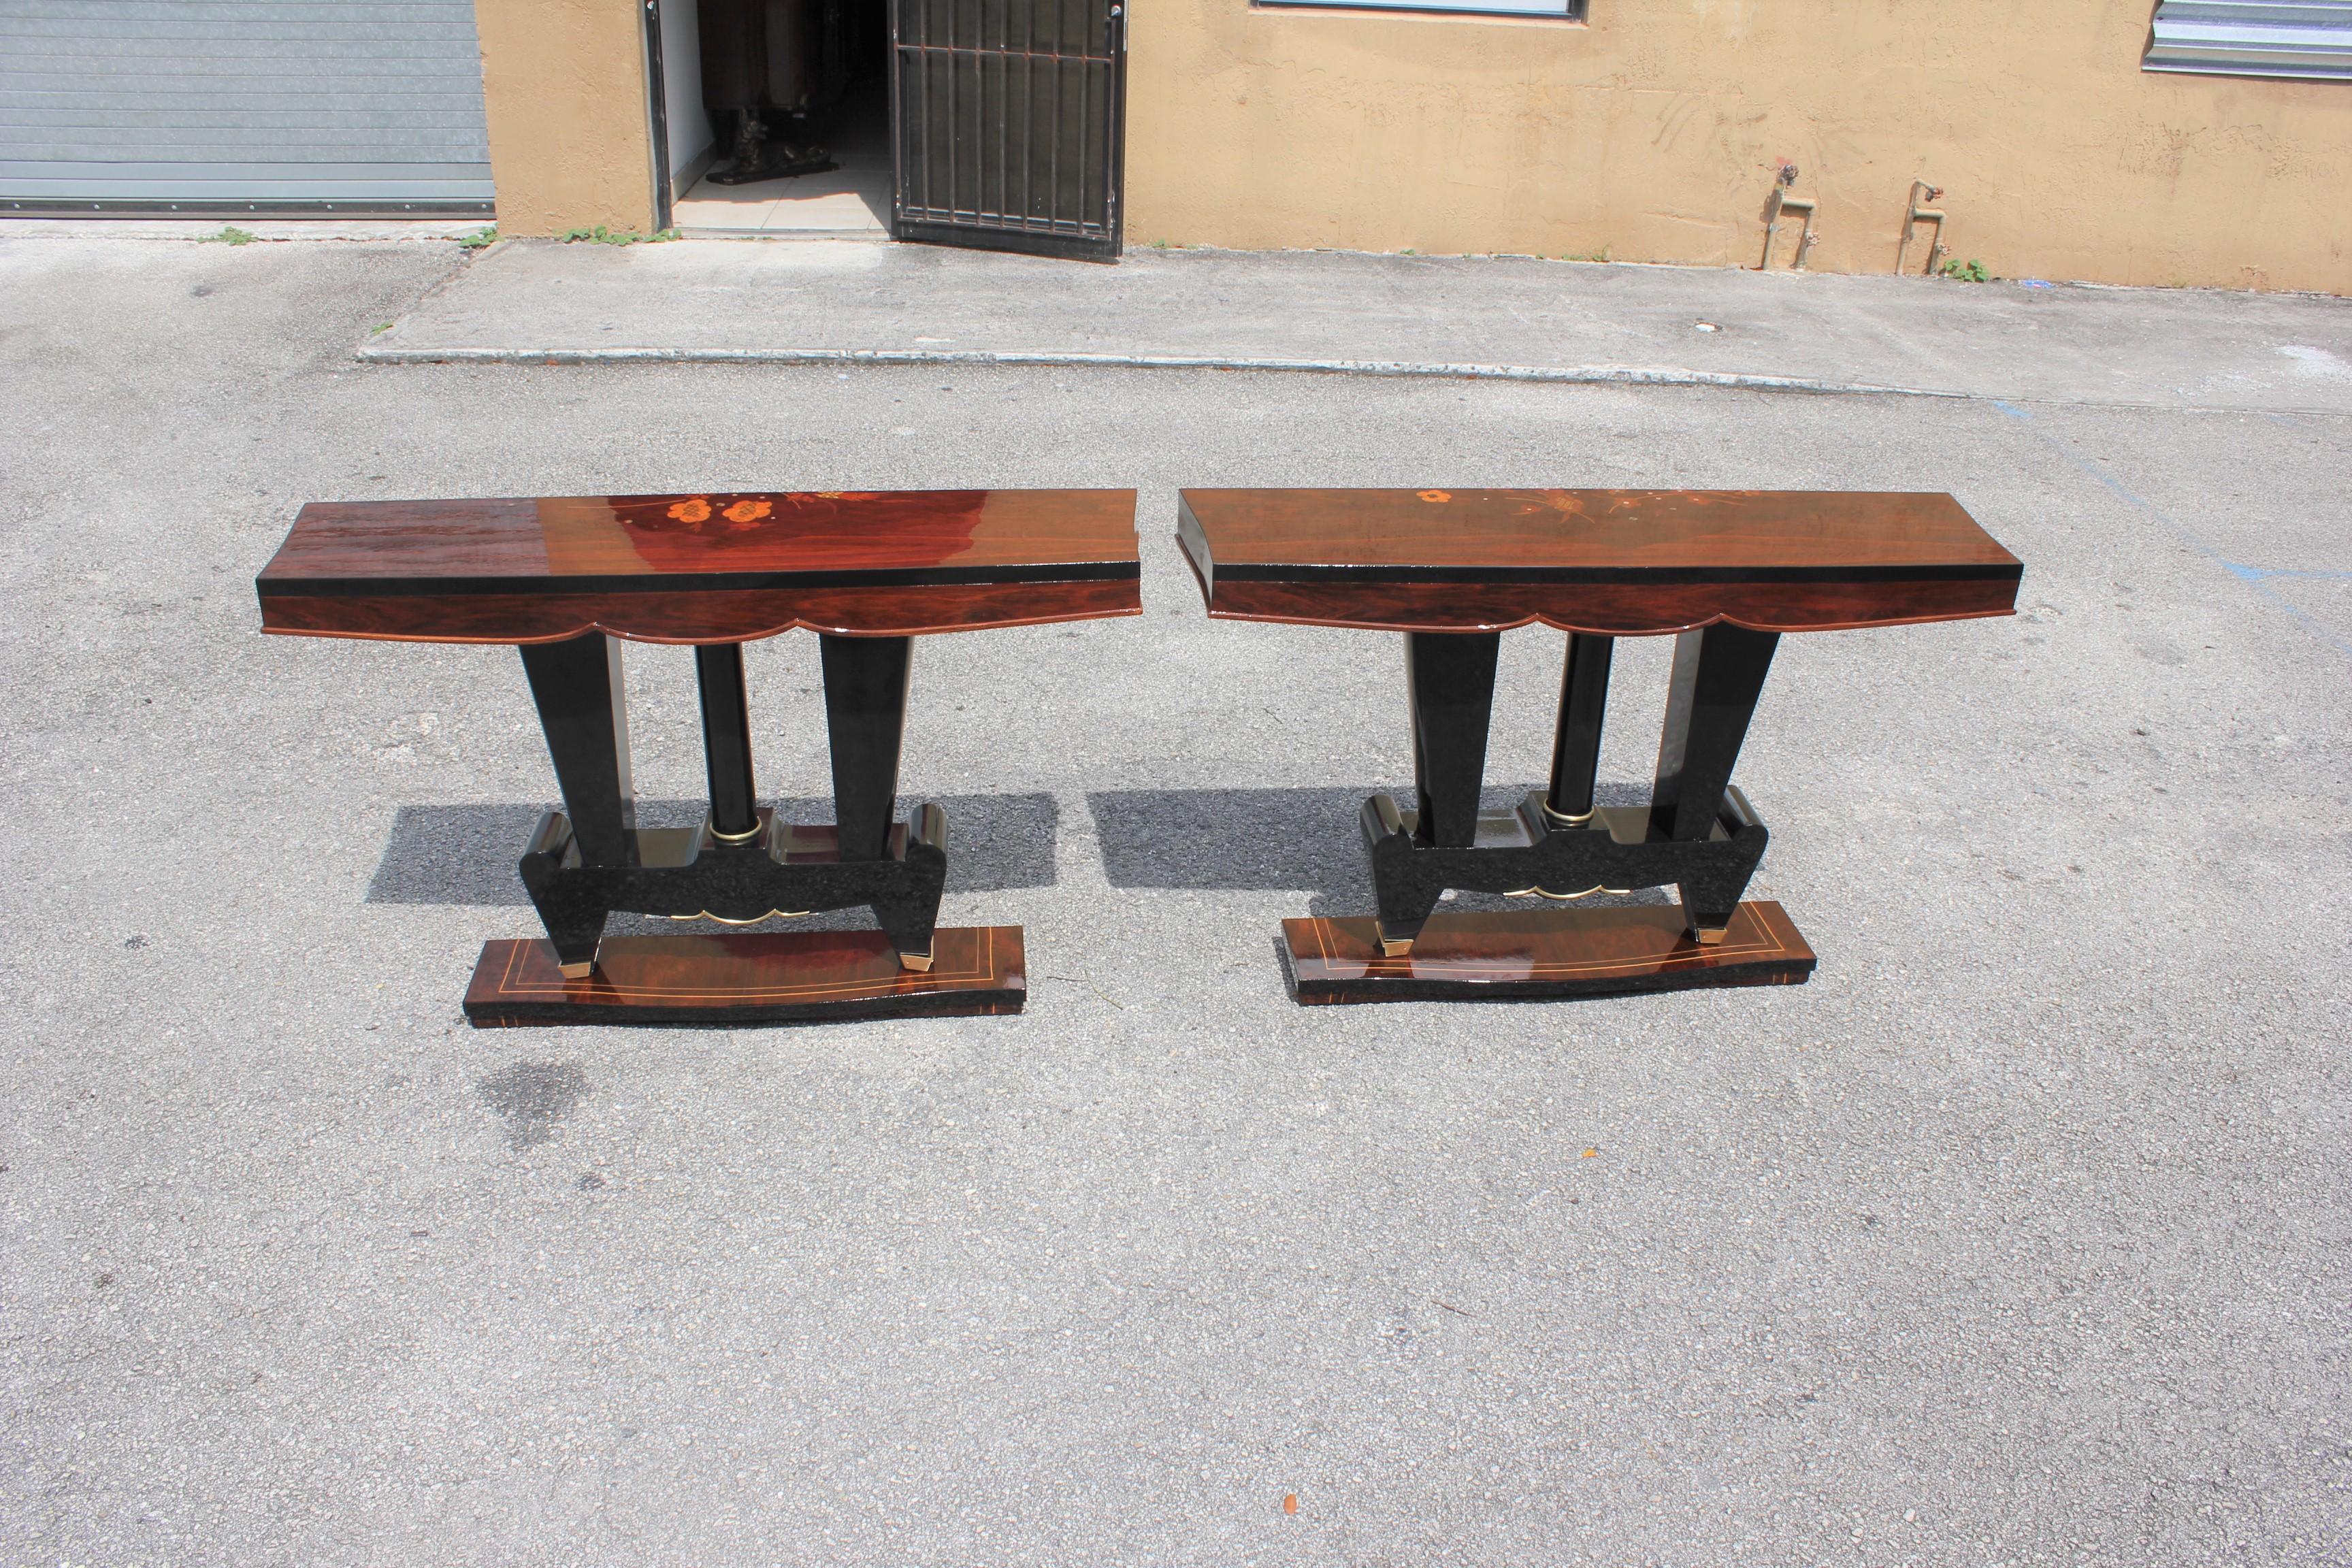 Classic pair of French Art Deco exotic Macassar ebony console tables, circa 1940s. Beautiful parquetry design exotic Macassar ebony top with black lacquer base, high gloss lacquer finish in both side, with beautiful bronze hardware detail, that rest